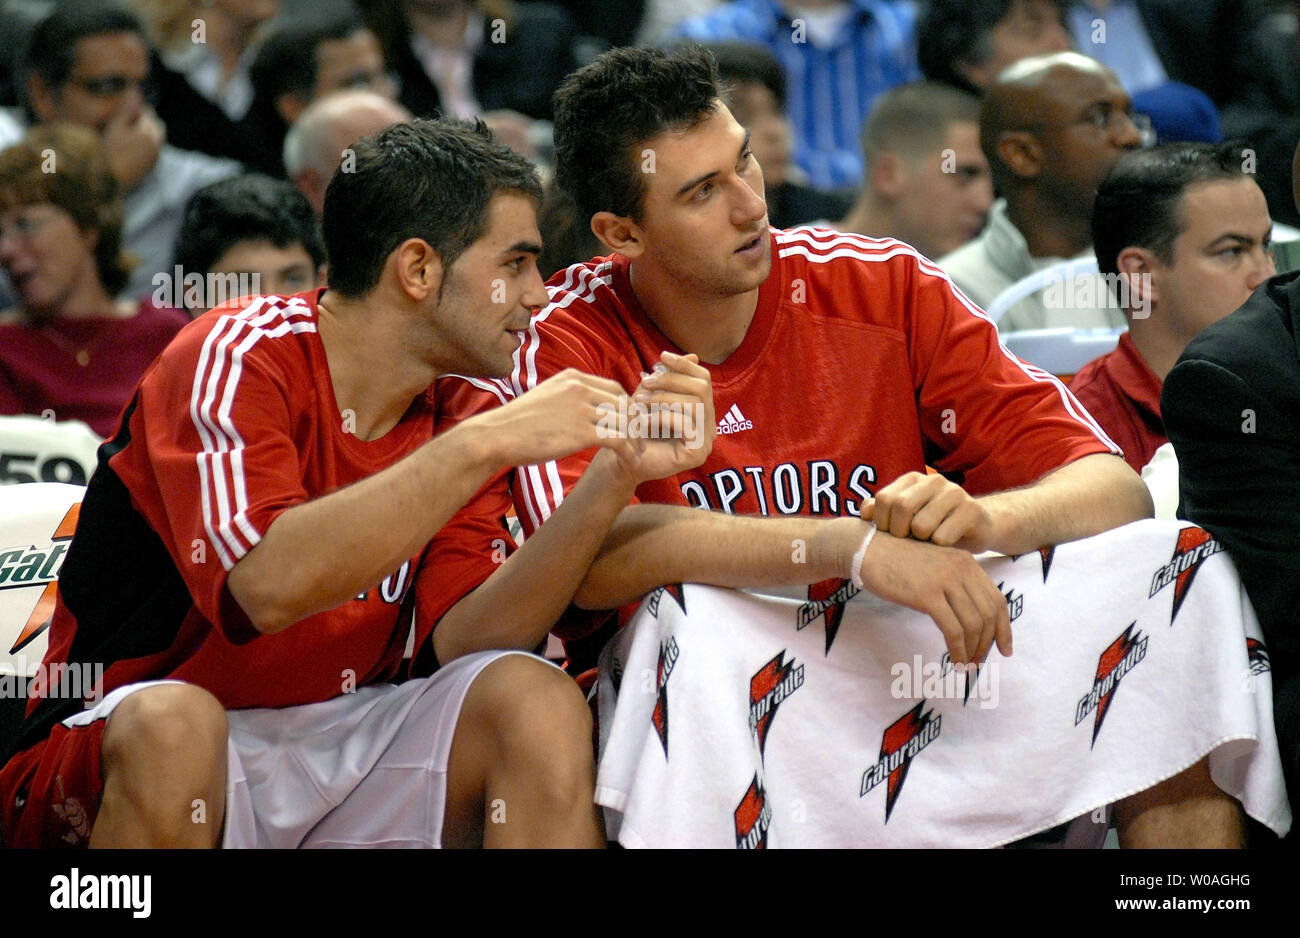 Toronto Raptors Jose Calderon (L) of Spain gives teammate Andrea Bargnani of Italy some pointers as they watch the game from the bench during second quarter action against the Philadelphia 76ers in